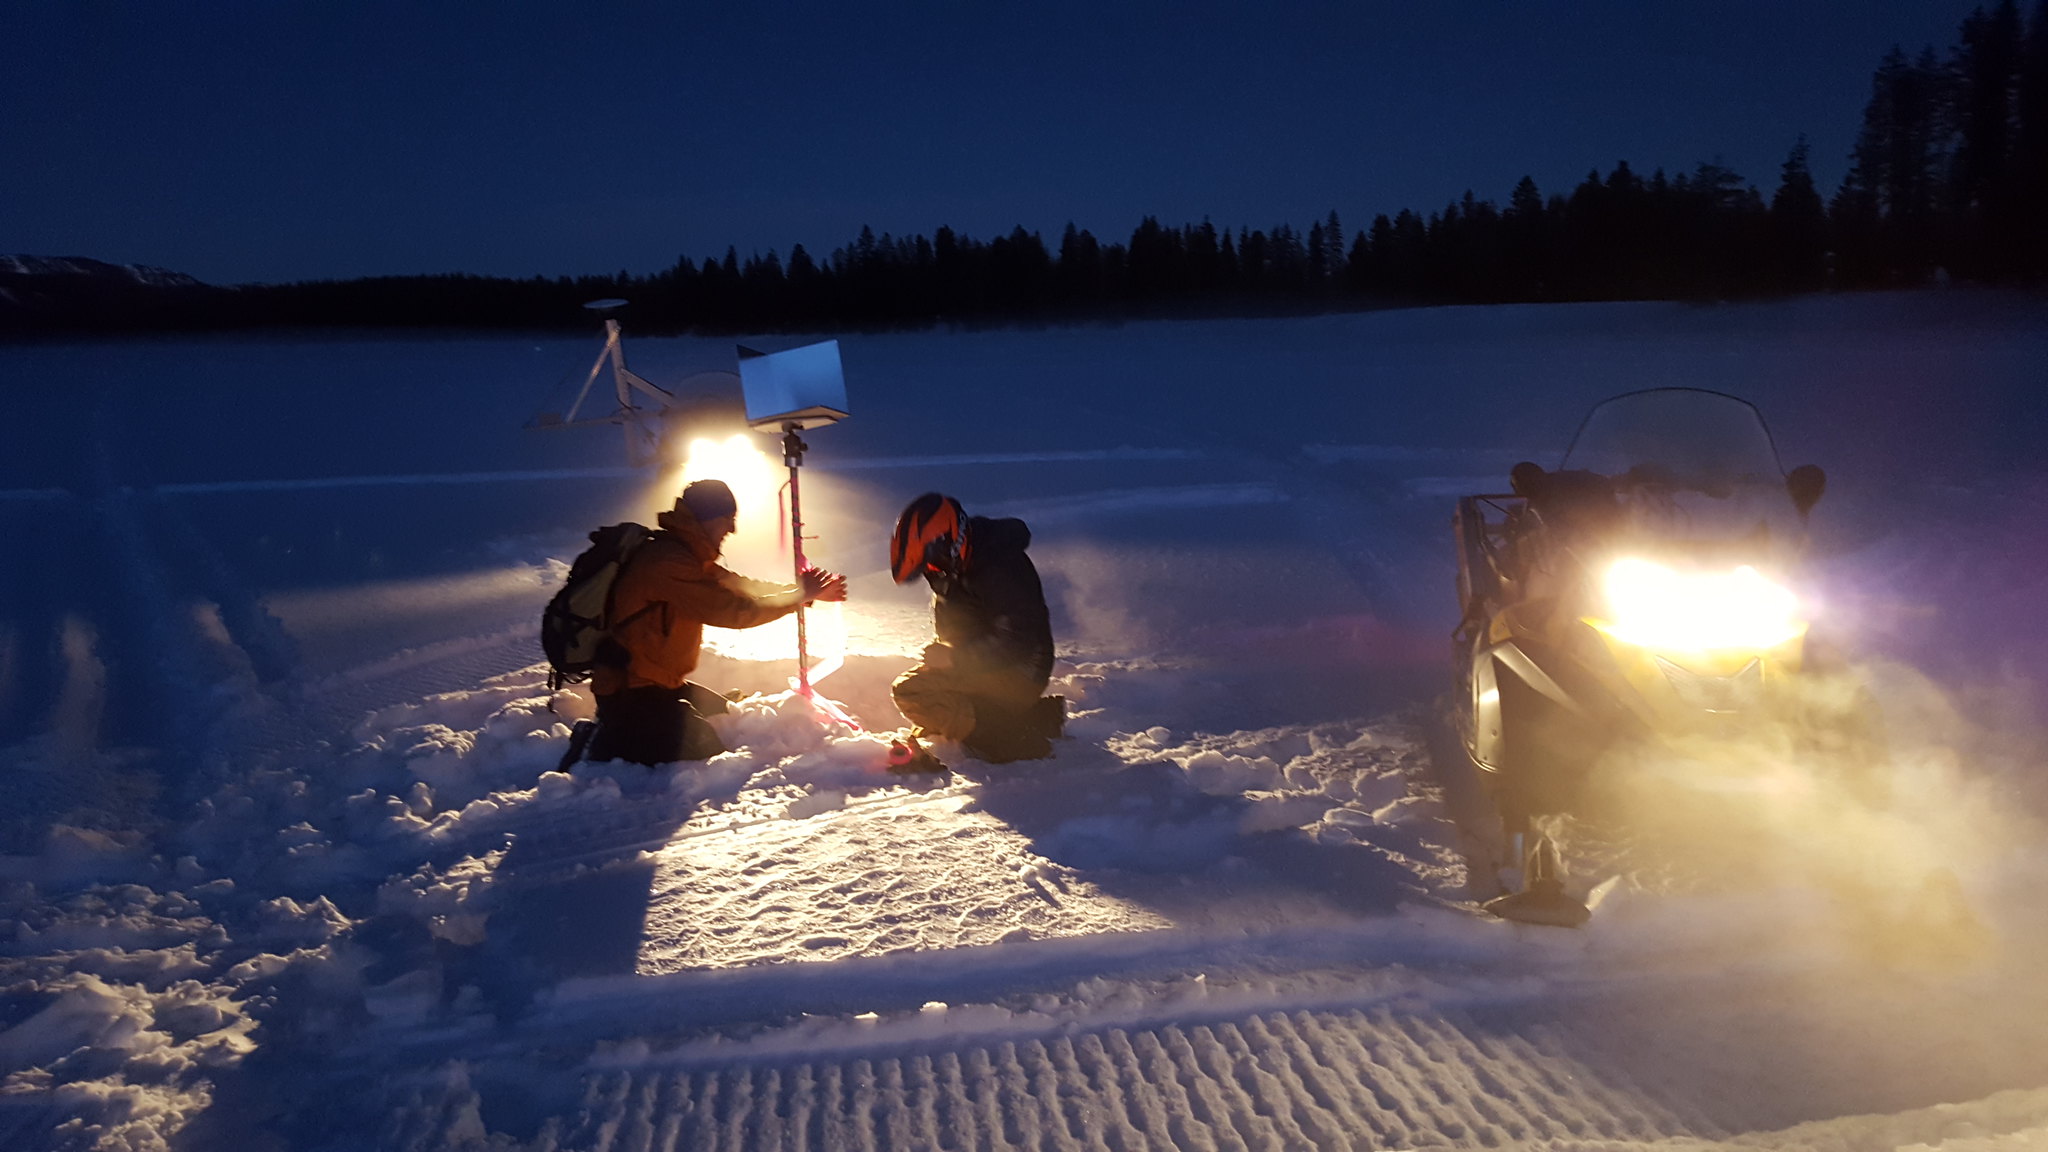 Two people in winter gear kneeling in snow. They are lit by a the headlights of two snowmobiles, one behind the two people and one to the side. 